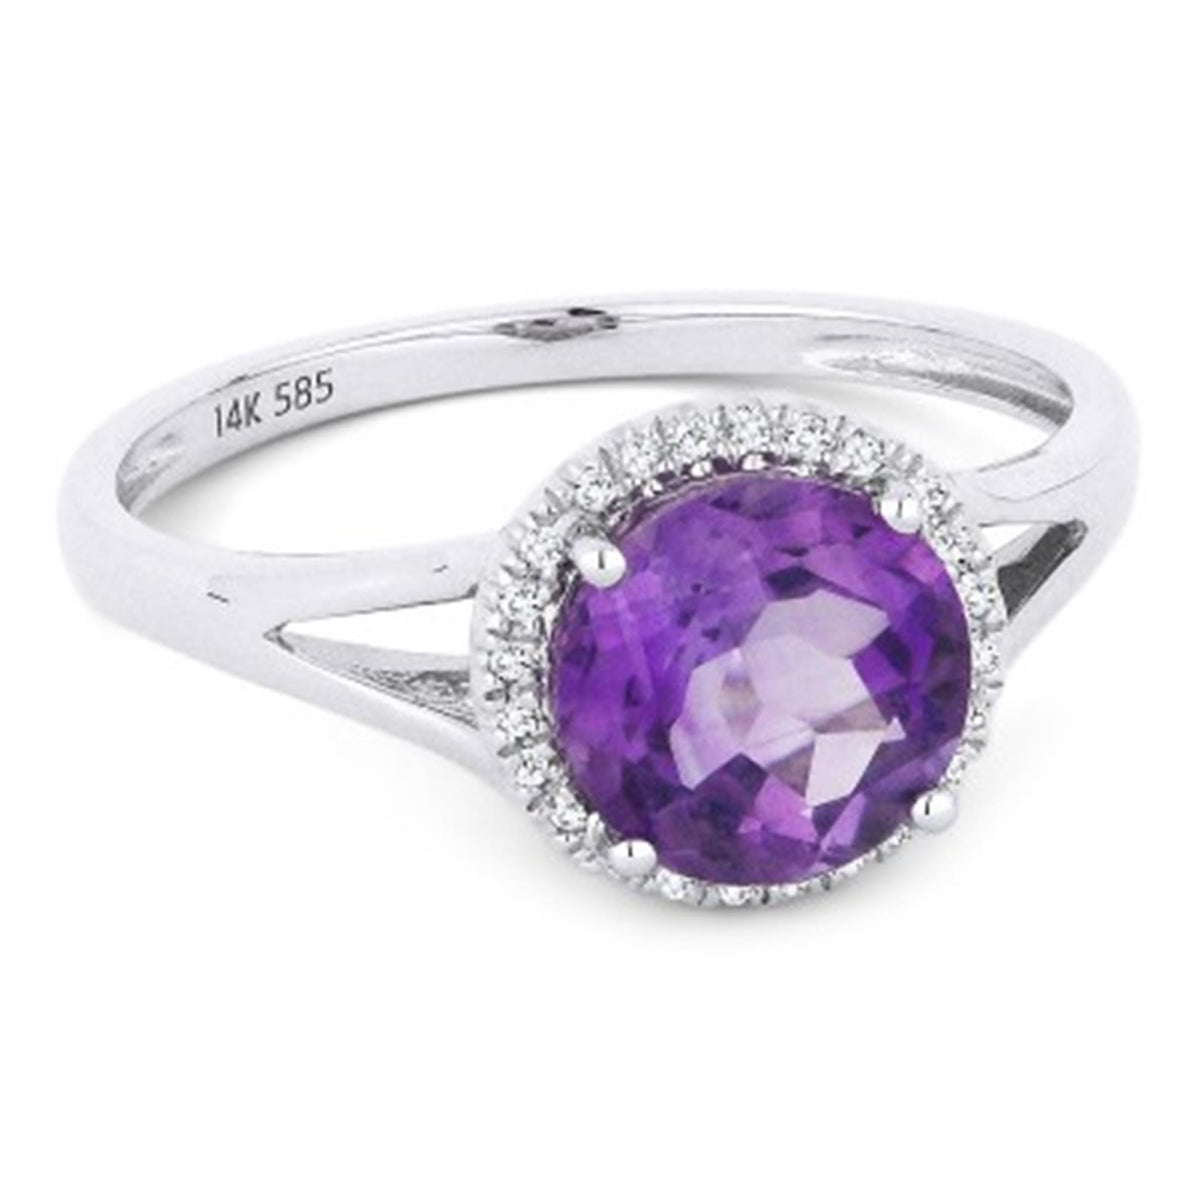 14Kt White Gold Halo Ring With 1.25ct Amethyst